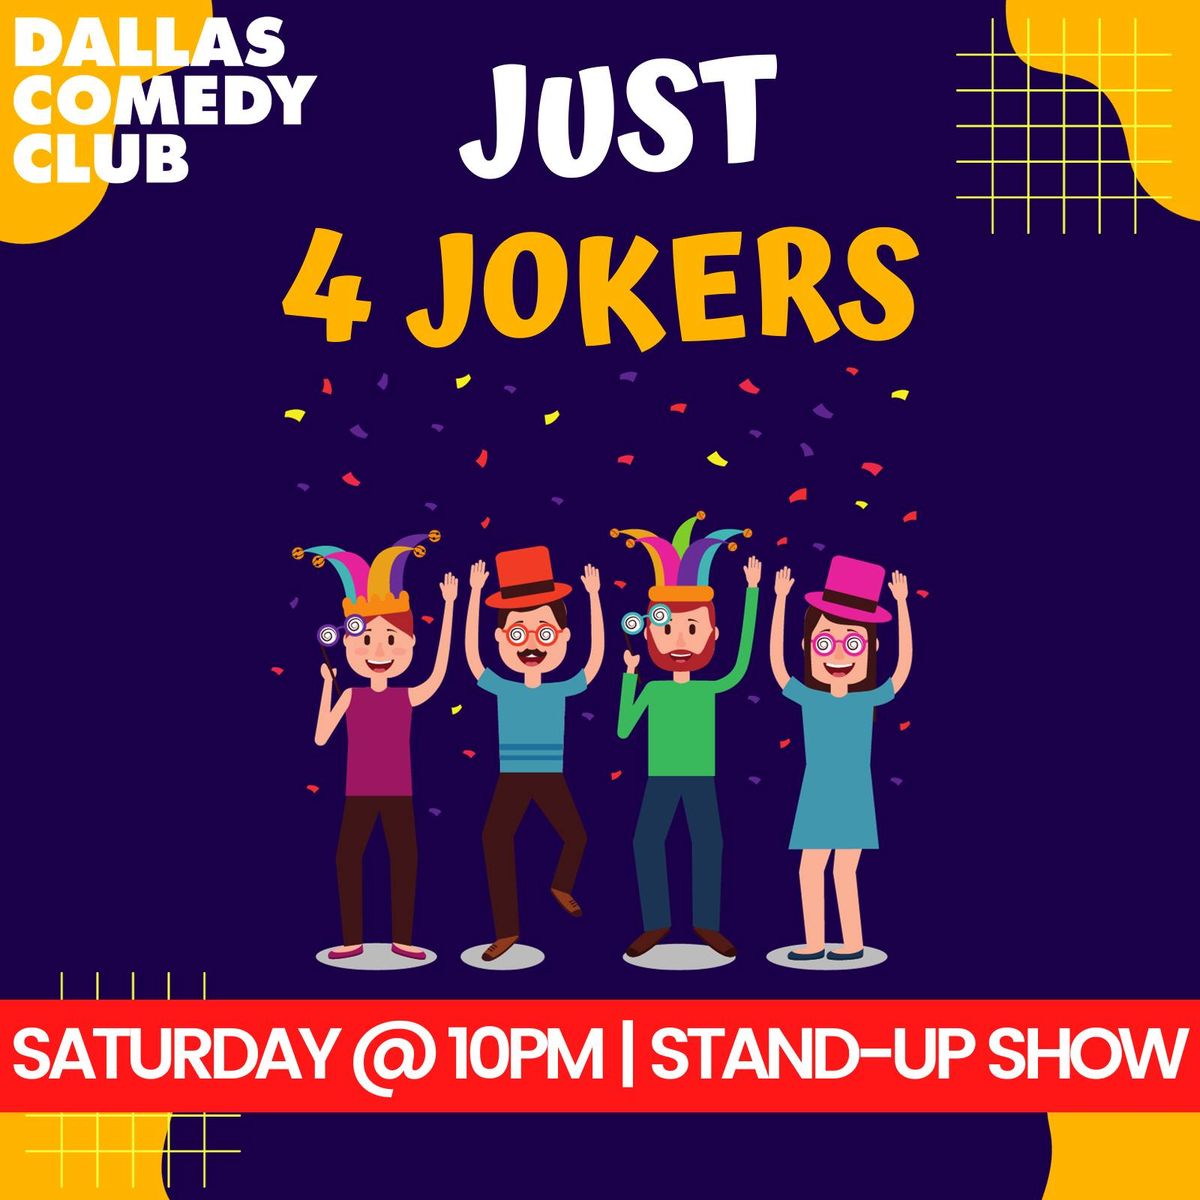 Just 4 Jokers - A Stand-up Show